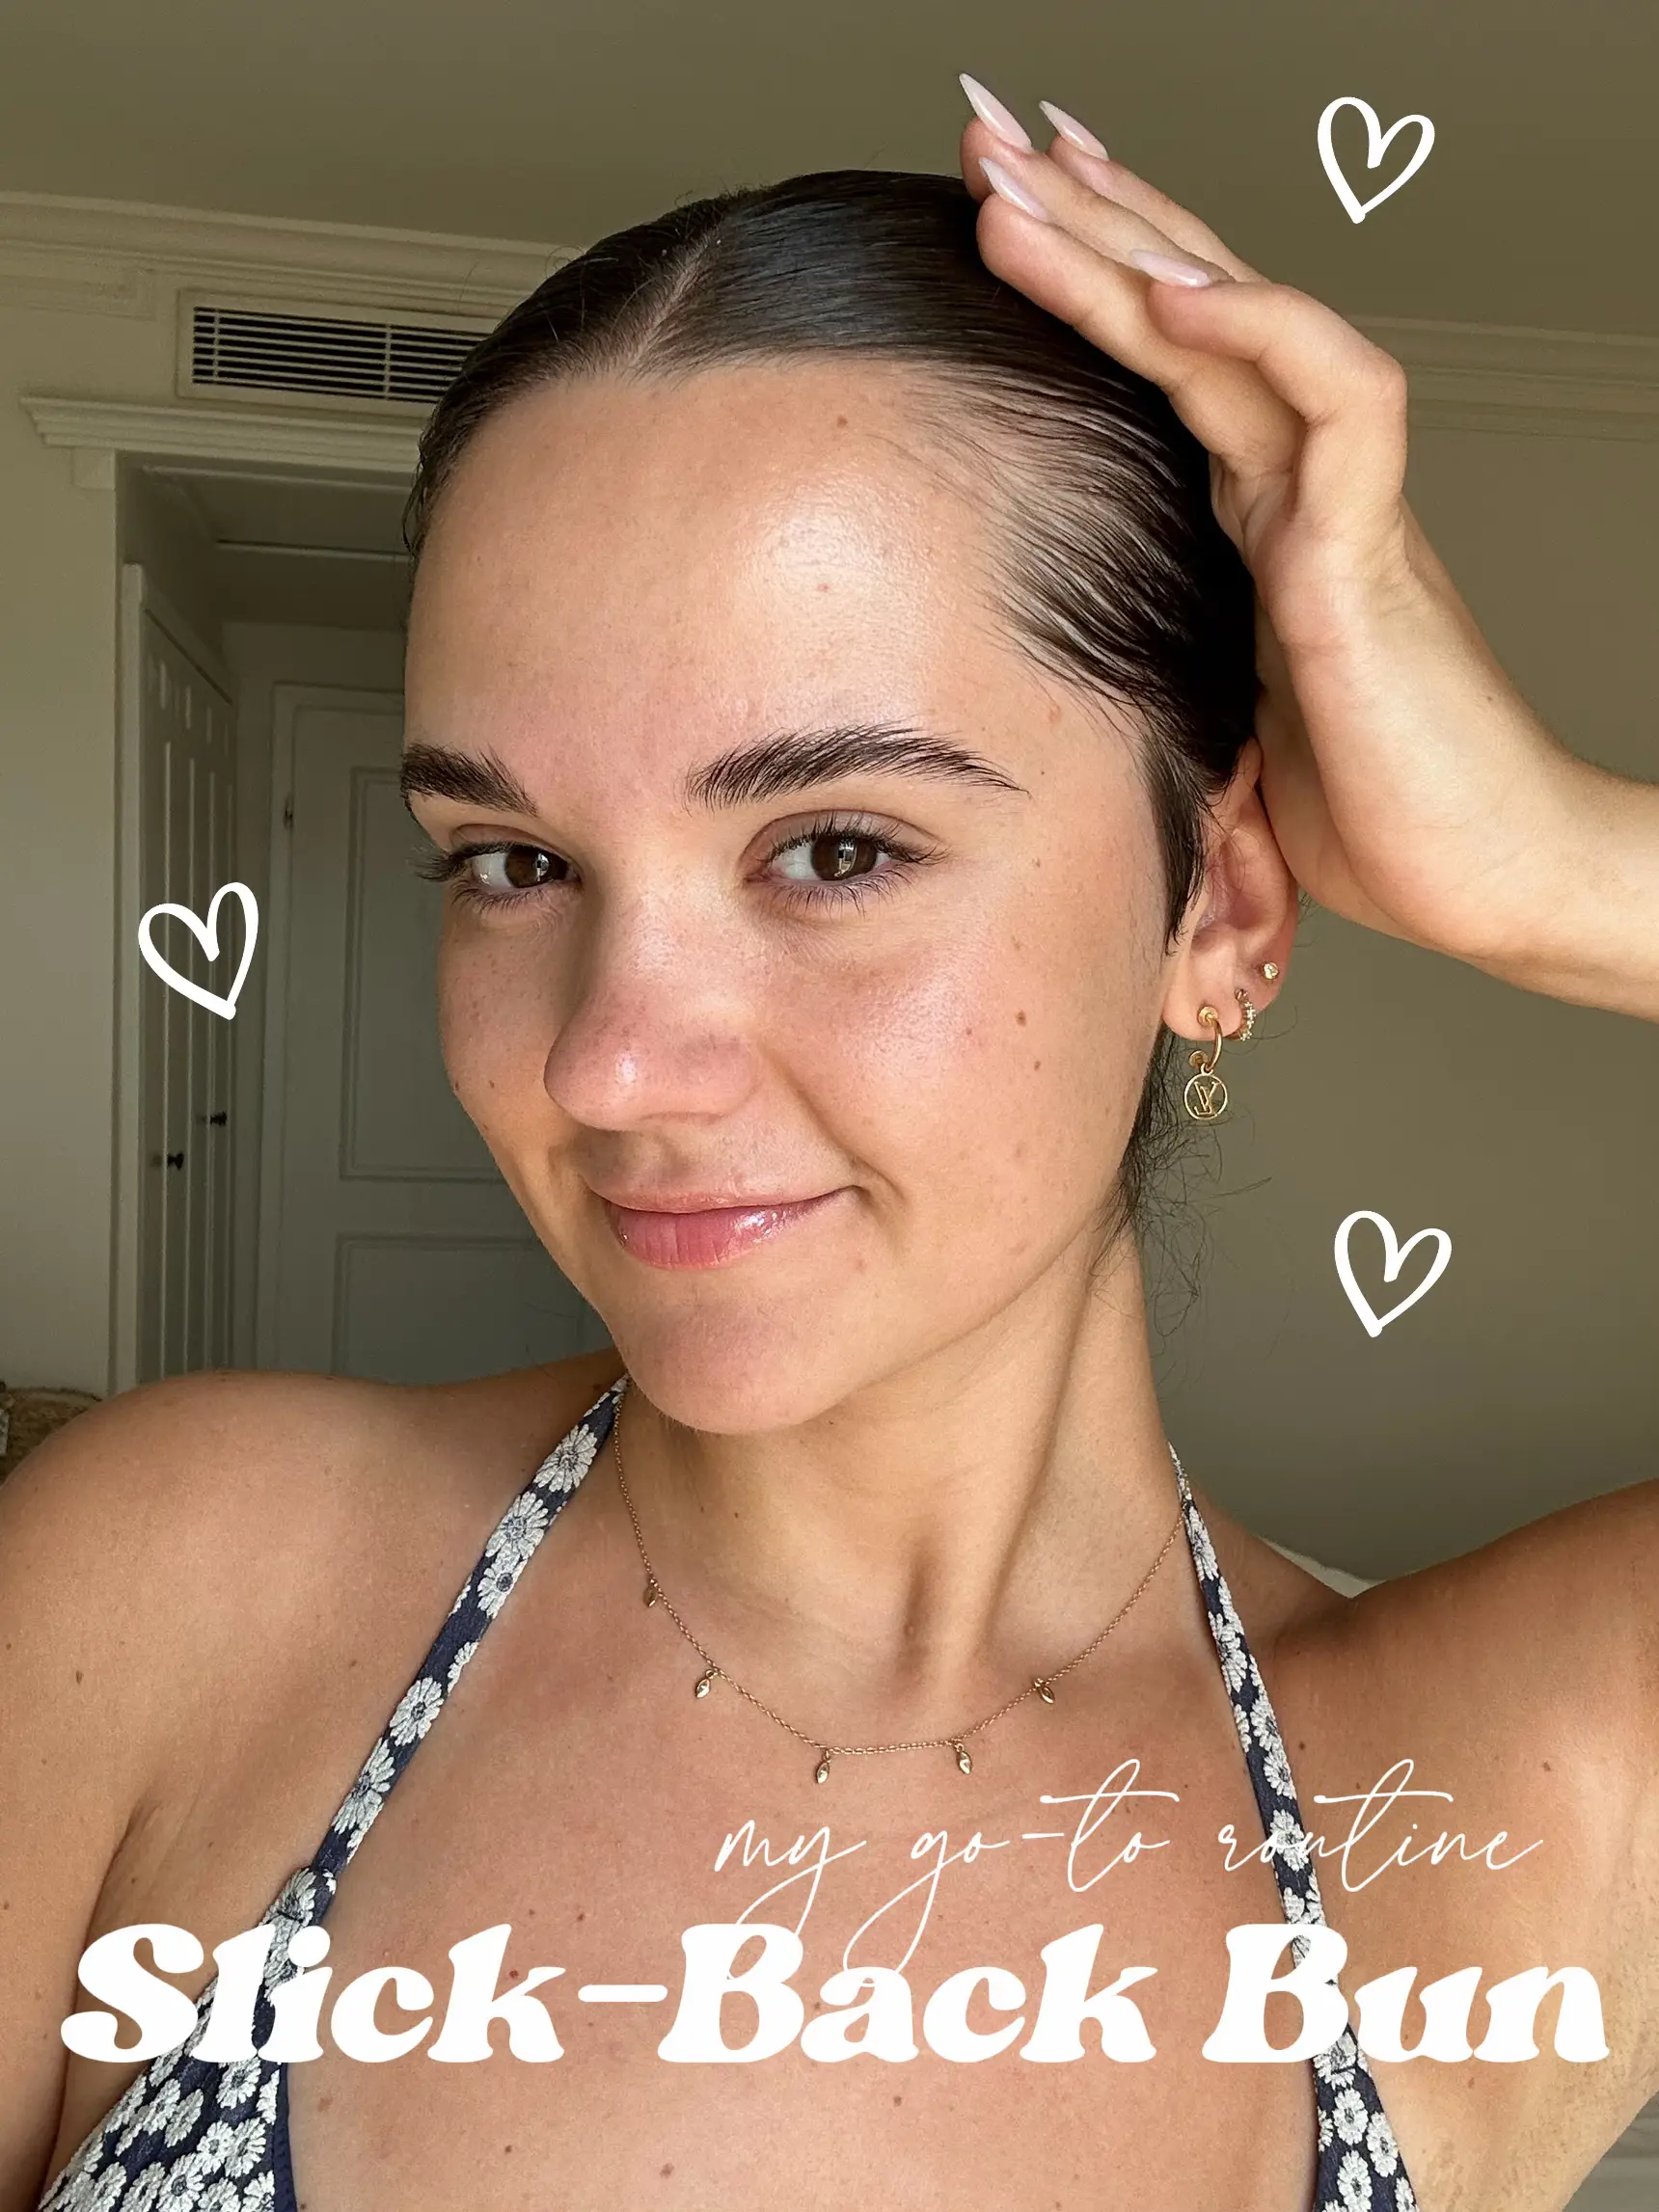 I Tried a Slicked-Back Bun Hack From TikTok: See the Photos